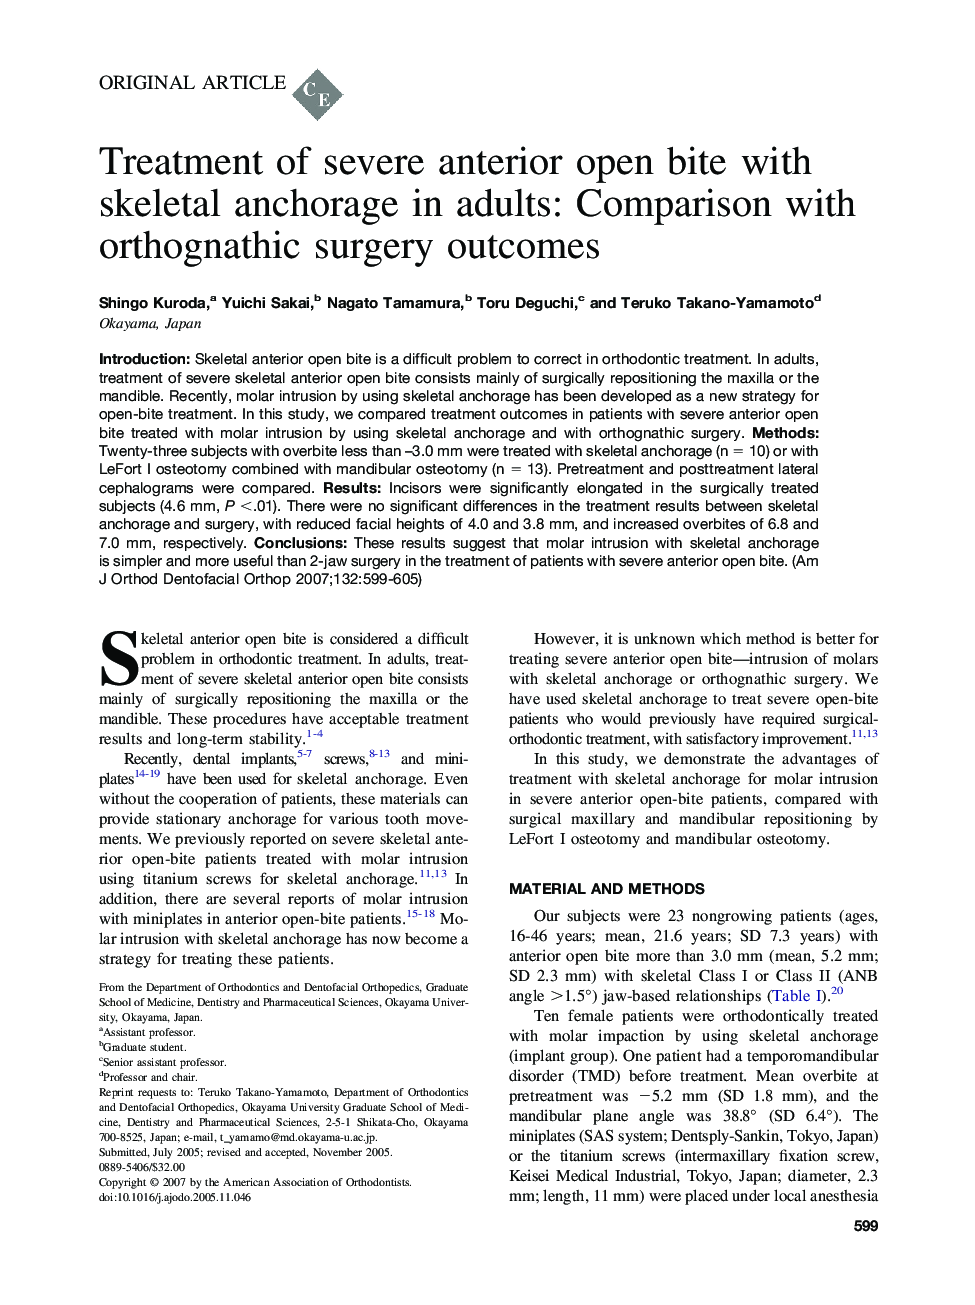 Treatment of severe anterior open bite with skeletal anchorage in adults: Comparison with orthognathic surgery outcomes